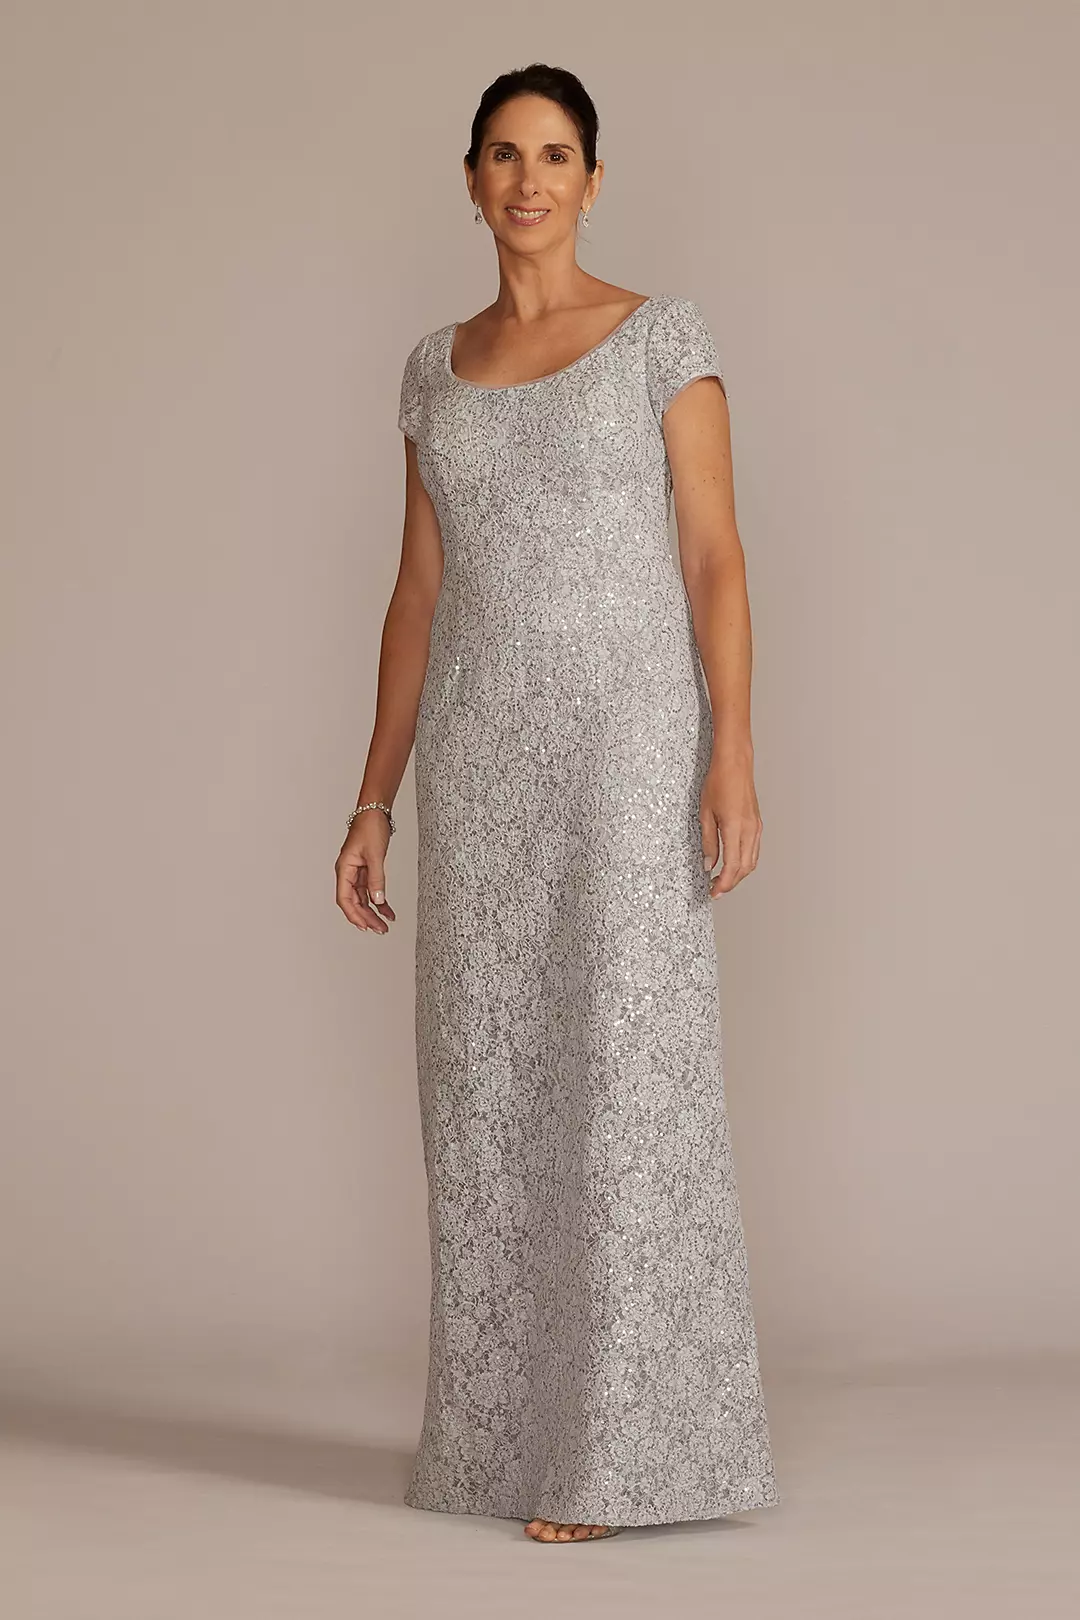 Short Sleeve Sequin Lace Sheath Gown Image